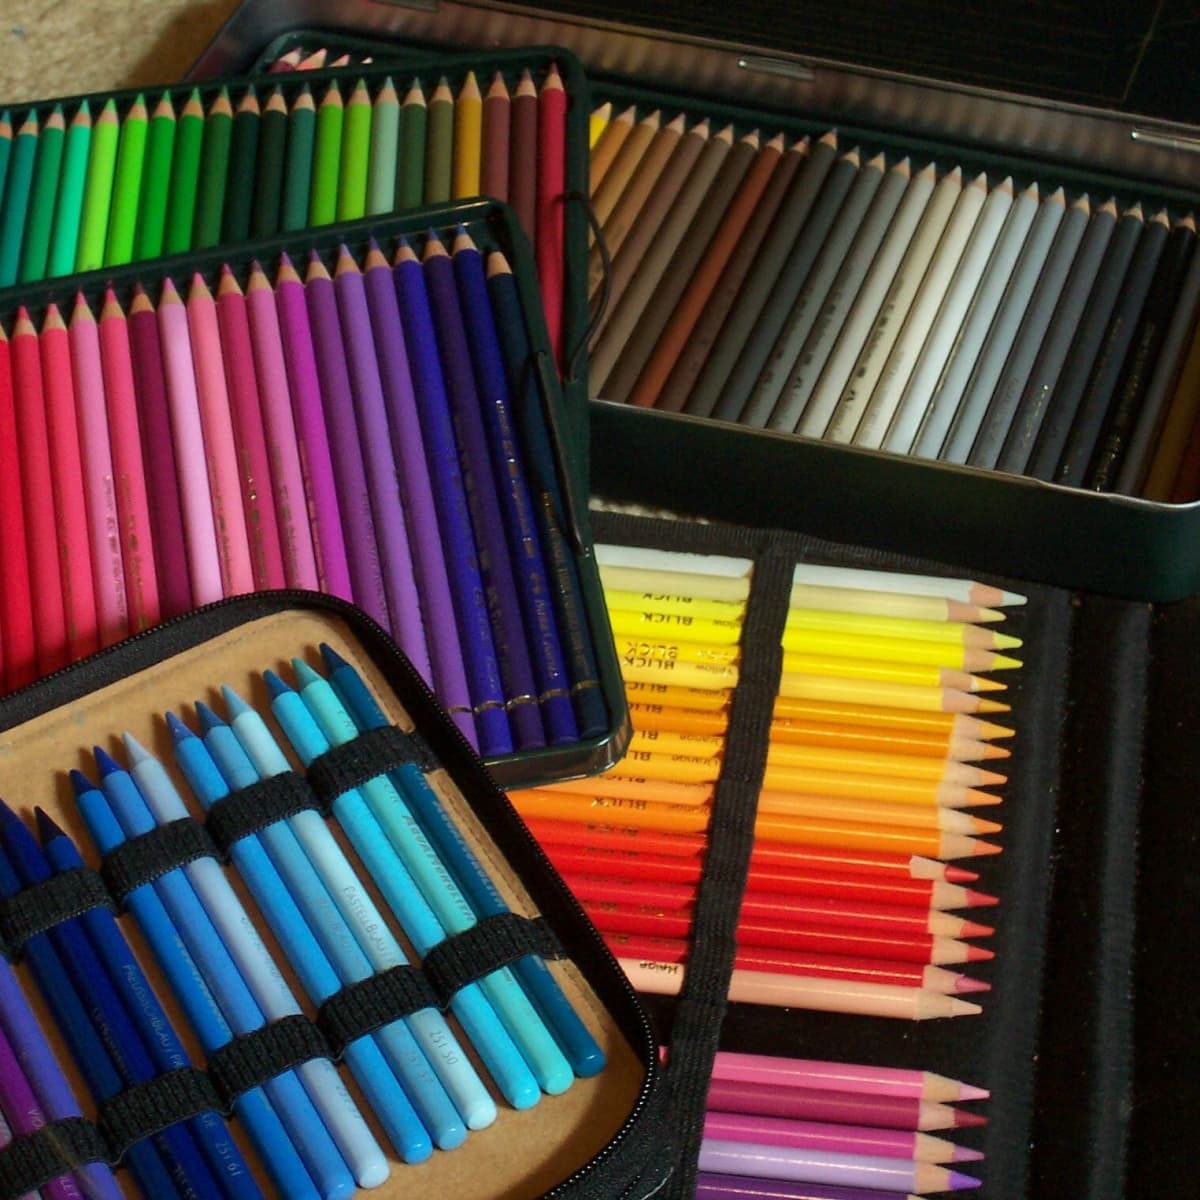 A Peek In My Sketchbook: Adding Color With Colored Pencils